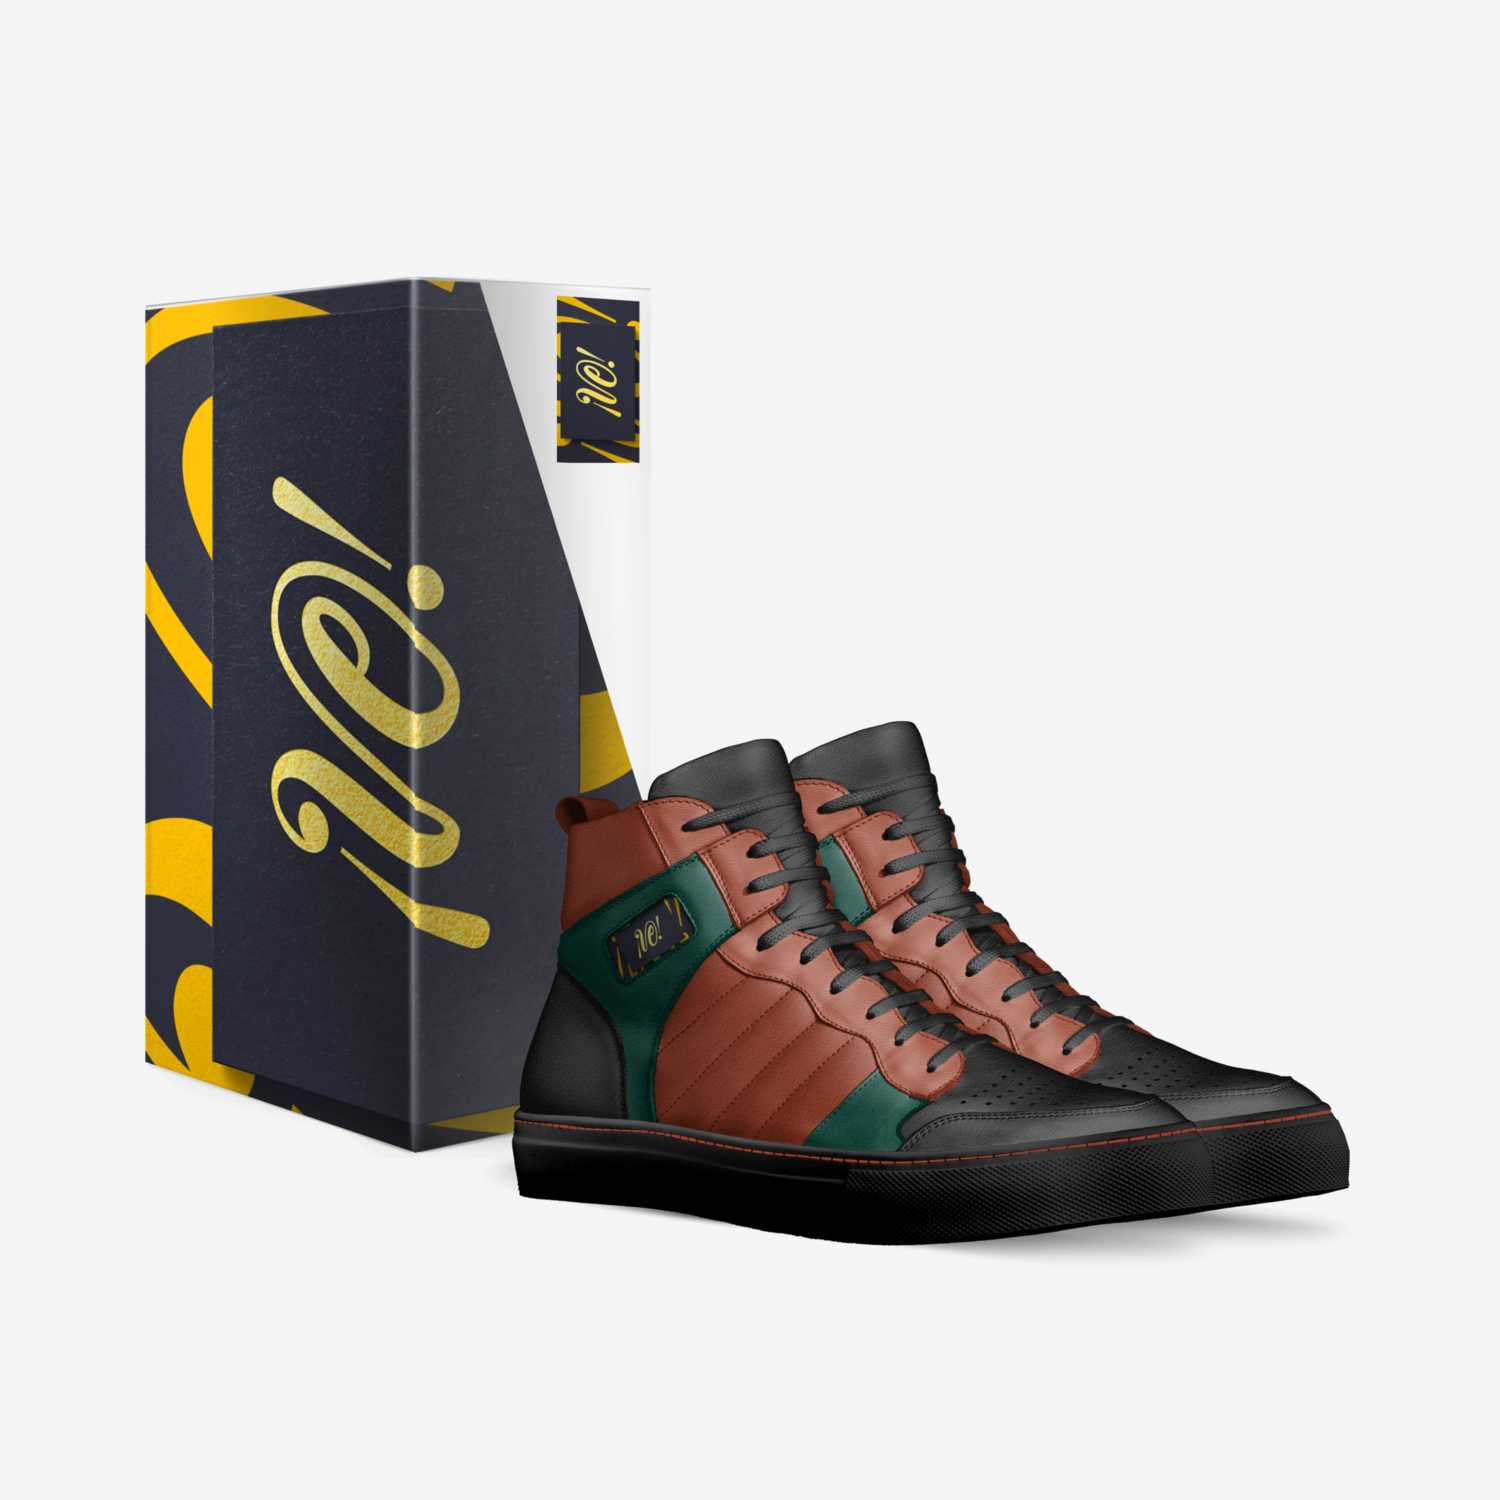 New Year # 1 custom made in Italy shoes by Vincent Moore | Box view